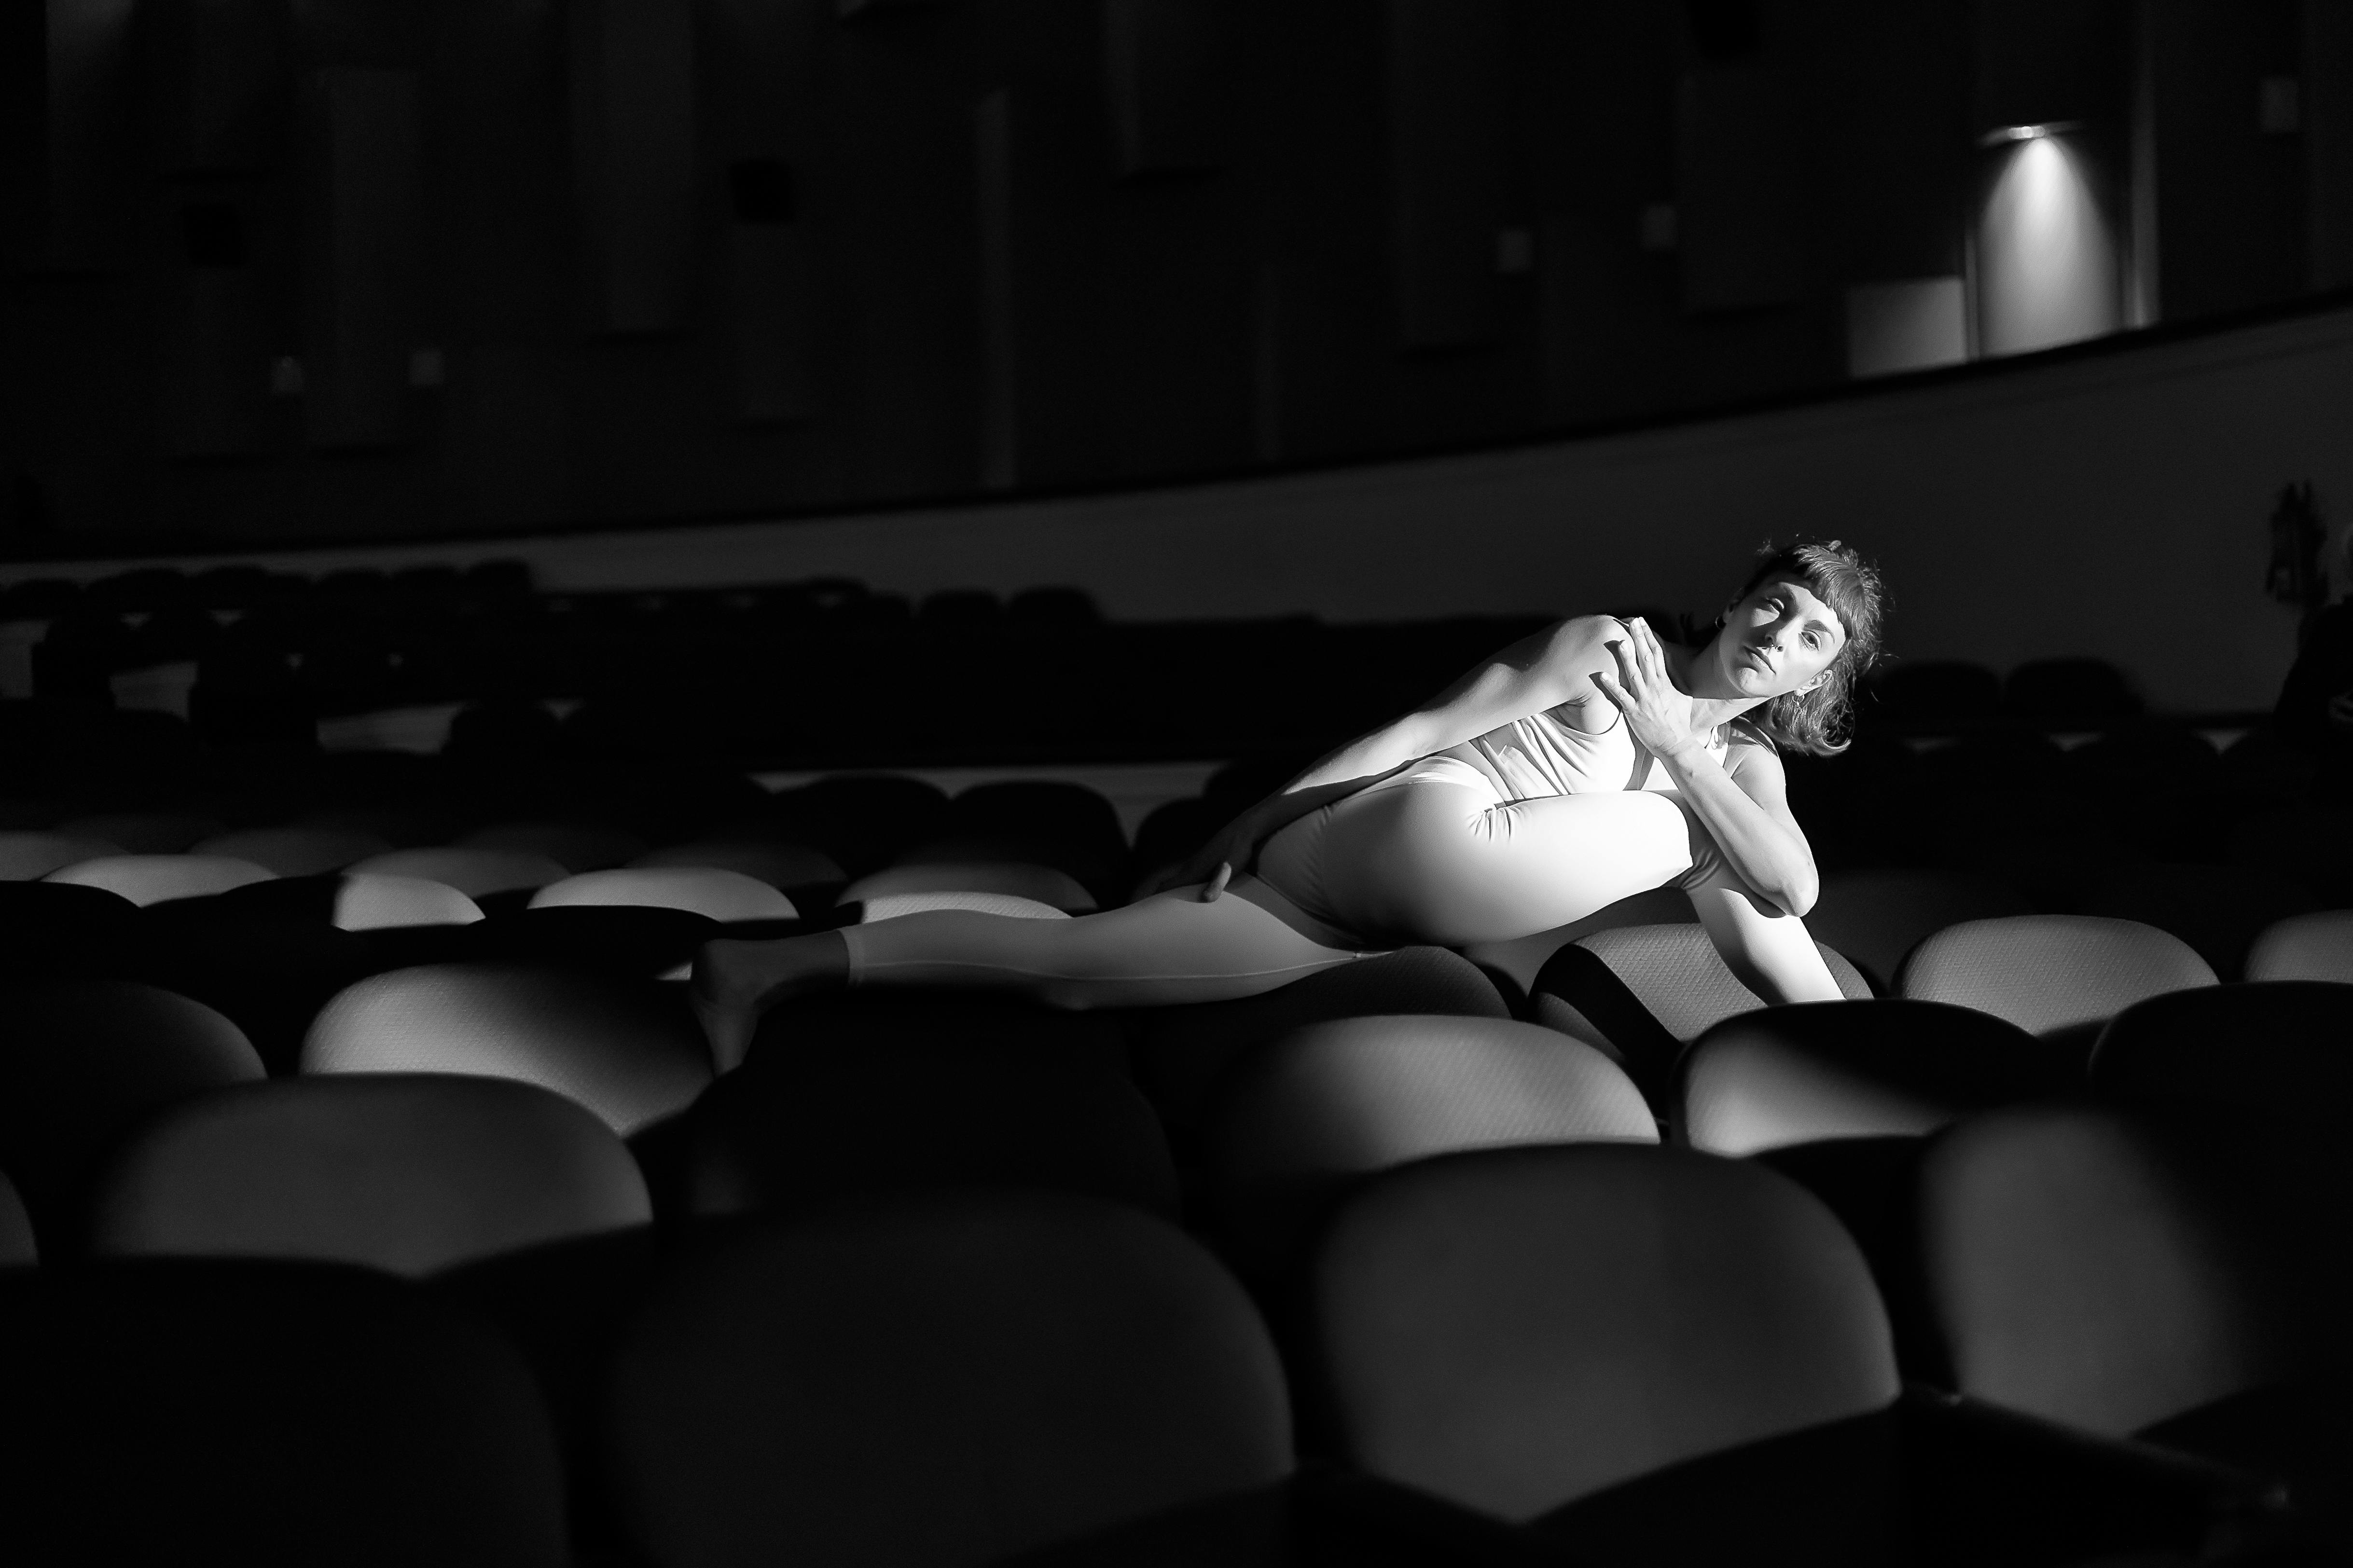 Empty Cinema, Cinema with Soft Chairs before the Premiere of the Film.  There are No People in the Cinema Stock Image - Image of blank, dark:  140415811